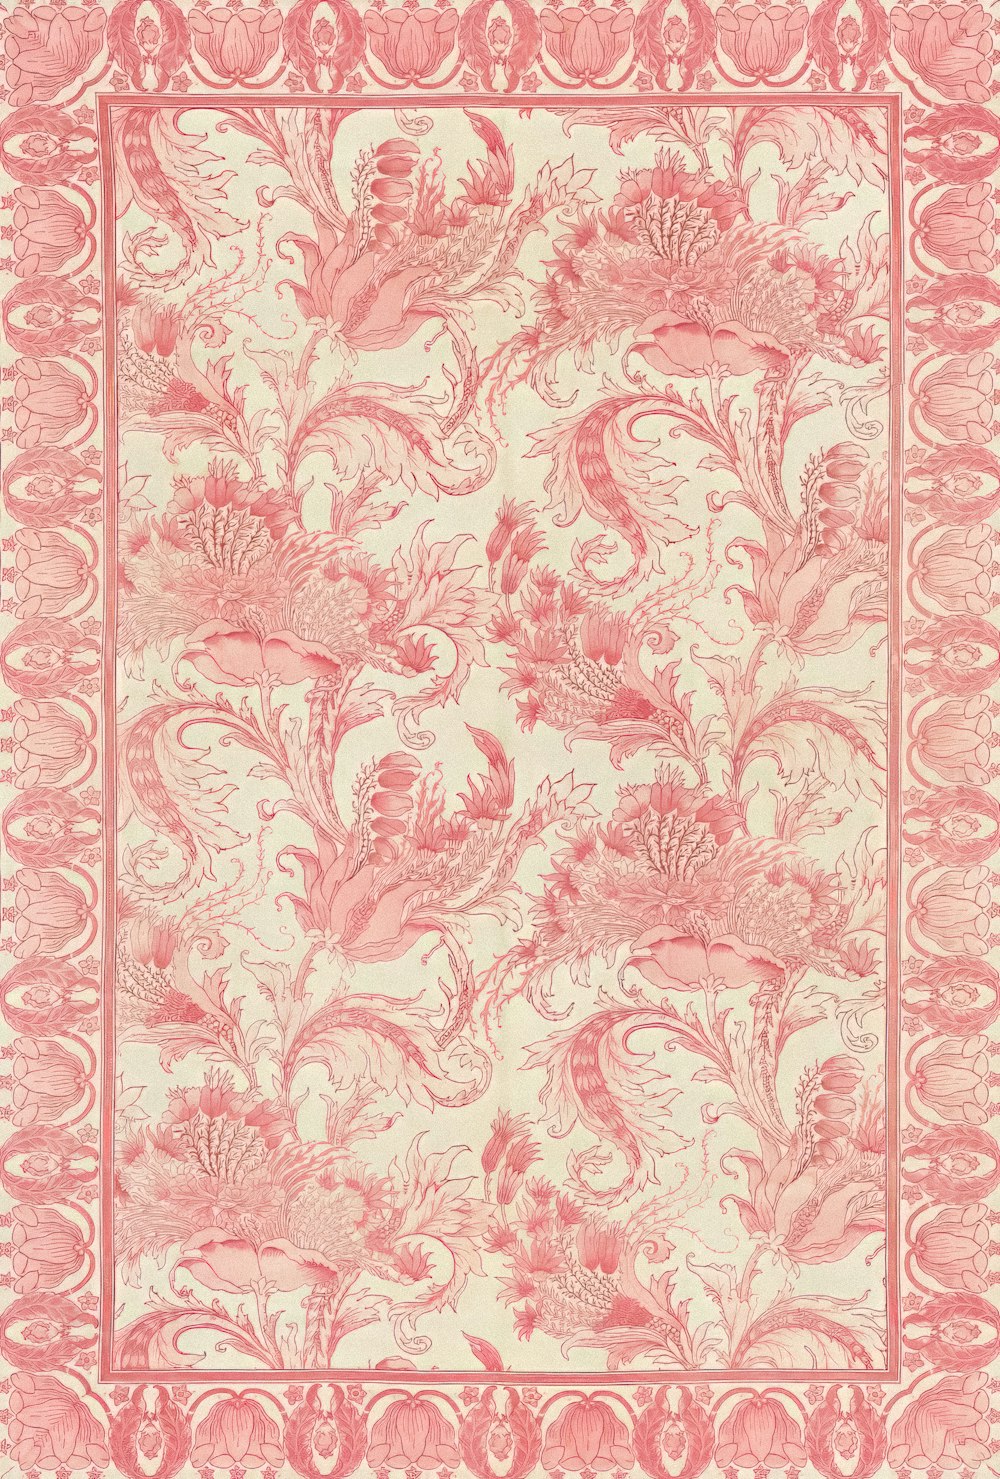 a pink and white floral design on a white background